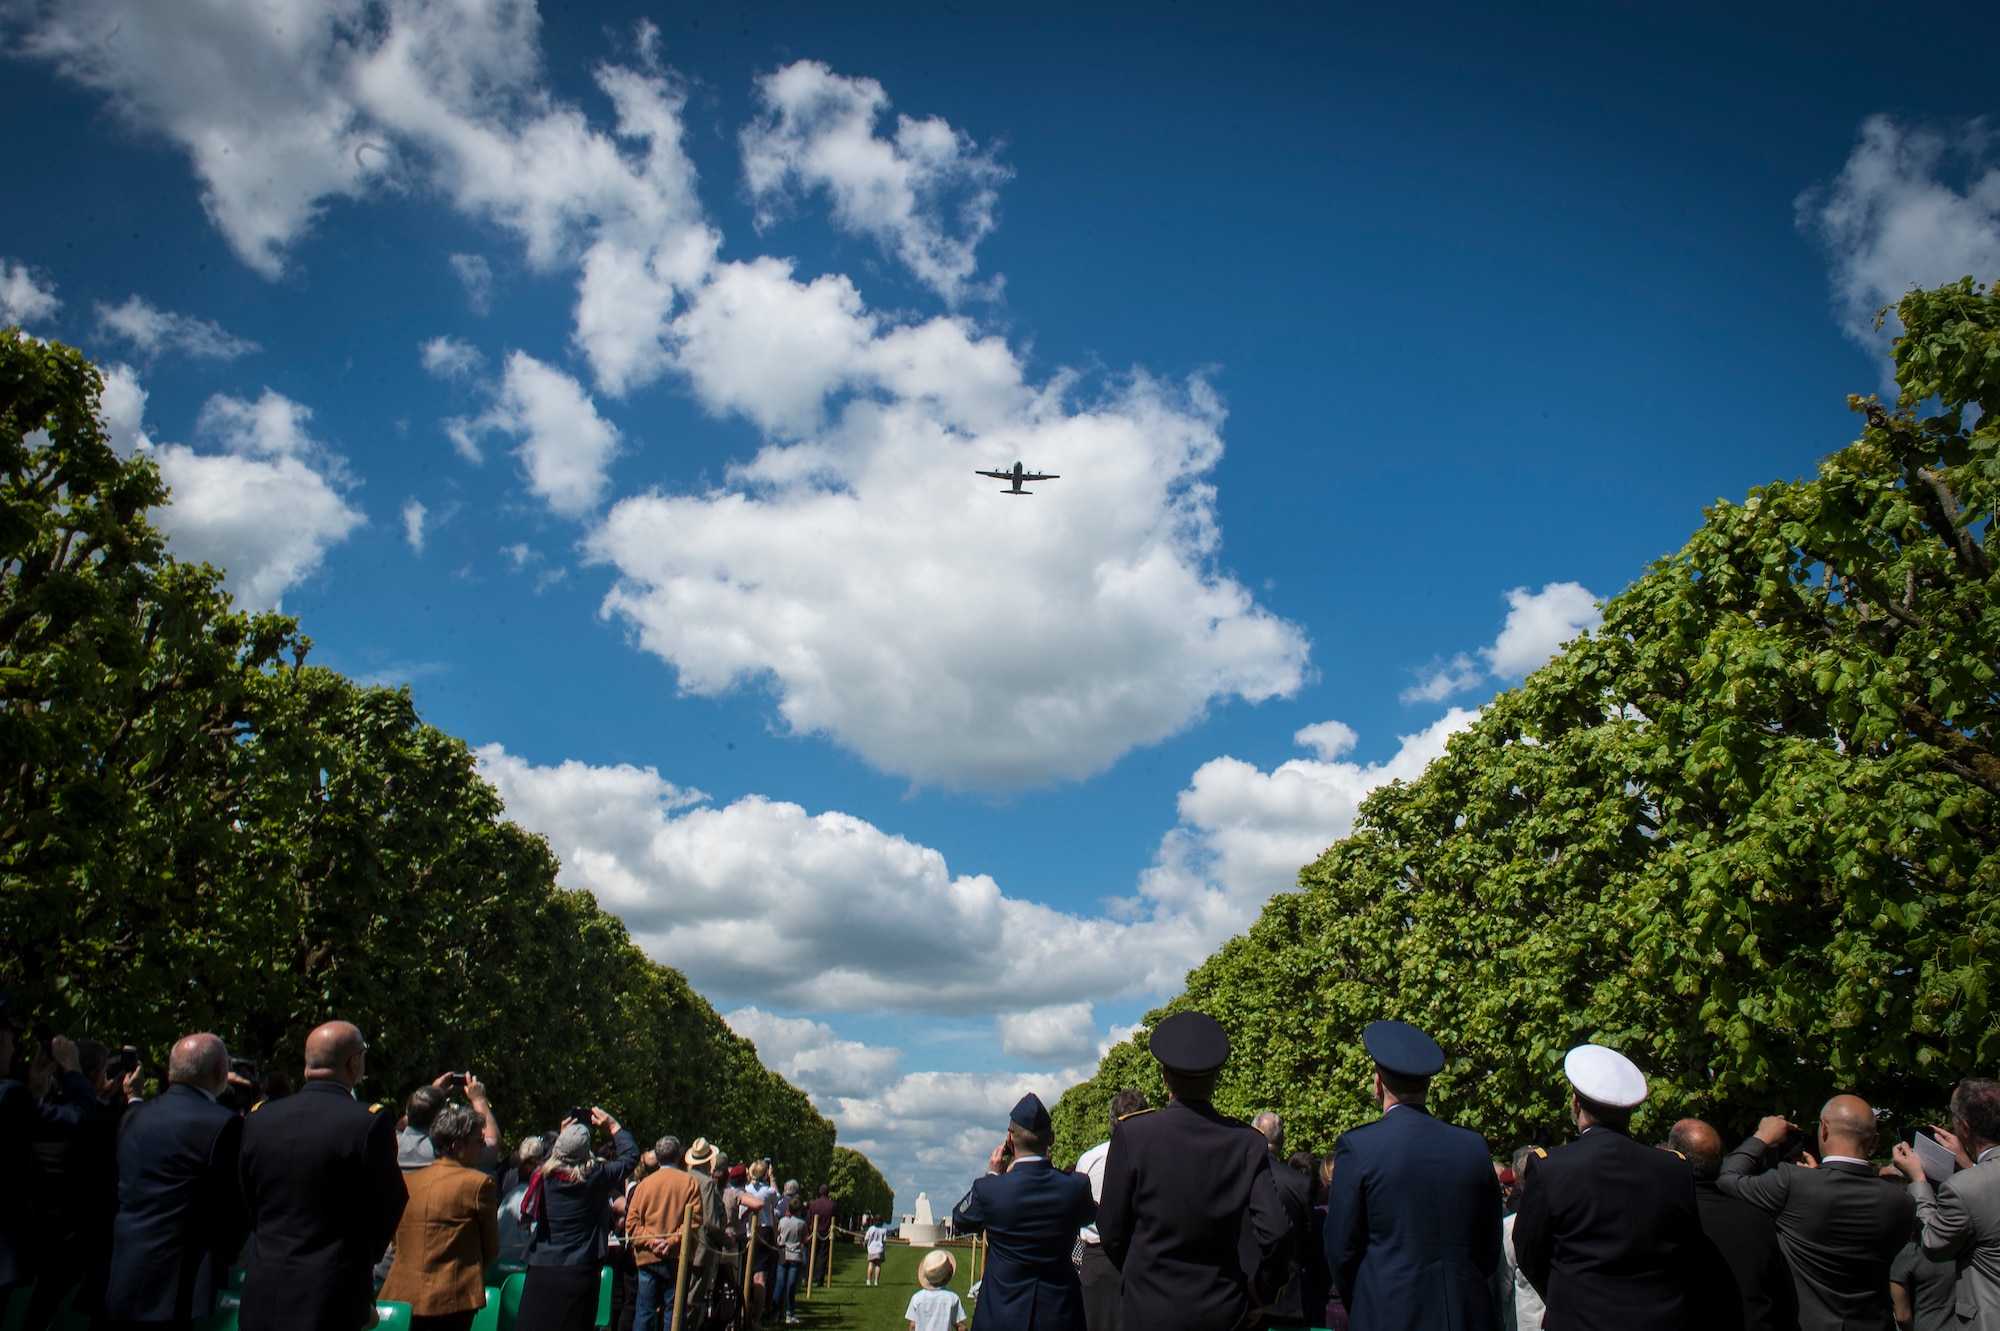 A 37th Airlift Squadron C-130J Super Hercules conduct a flyover during a Memorial Day ceremony at the Saint-Mihiel American Cemetery, Thiaucourt-Regniéville, France, May 26, 2019. The C-130J incorporates state-of-the-art technology, which reduces manpower requirements, lowers operating and support costs, and provides life-cycle cost savings over earlier C-130 models. (U.S. Air Force photo by Staff Sgt. Jonathan Bass)